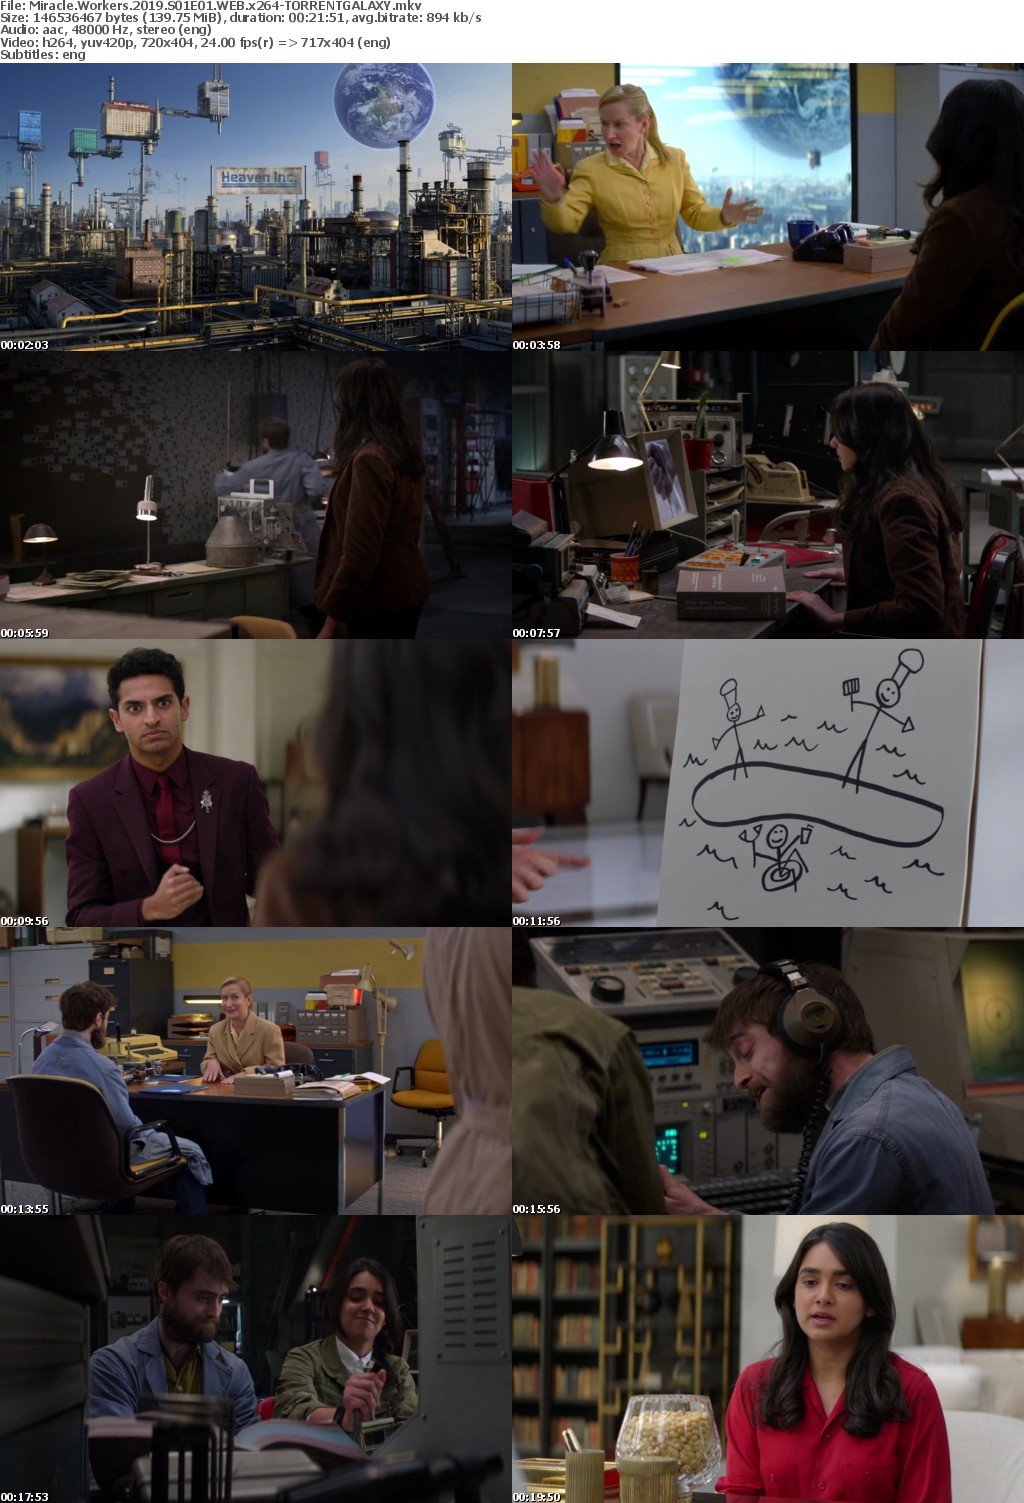 Miracle Workers 2019 S01E01 WEB x264-GALAXY